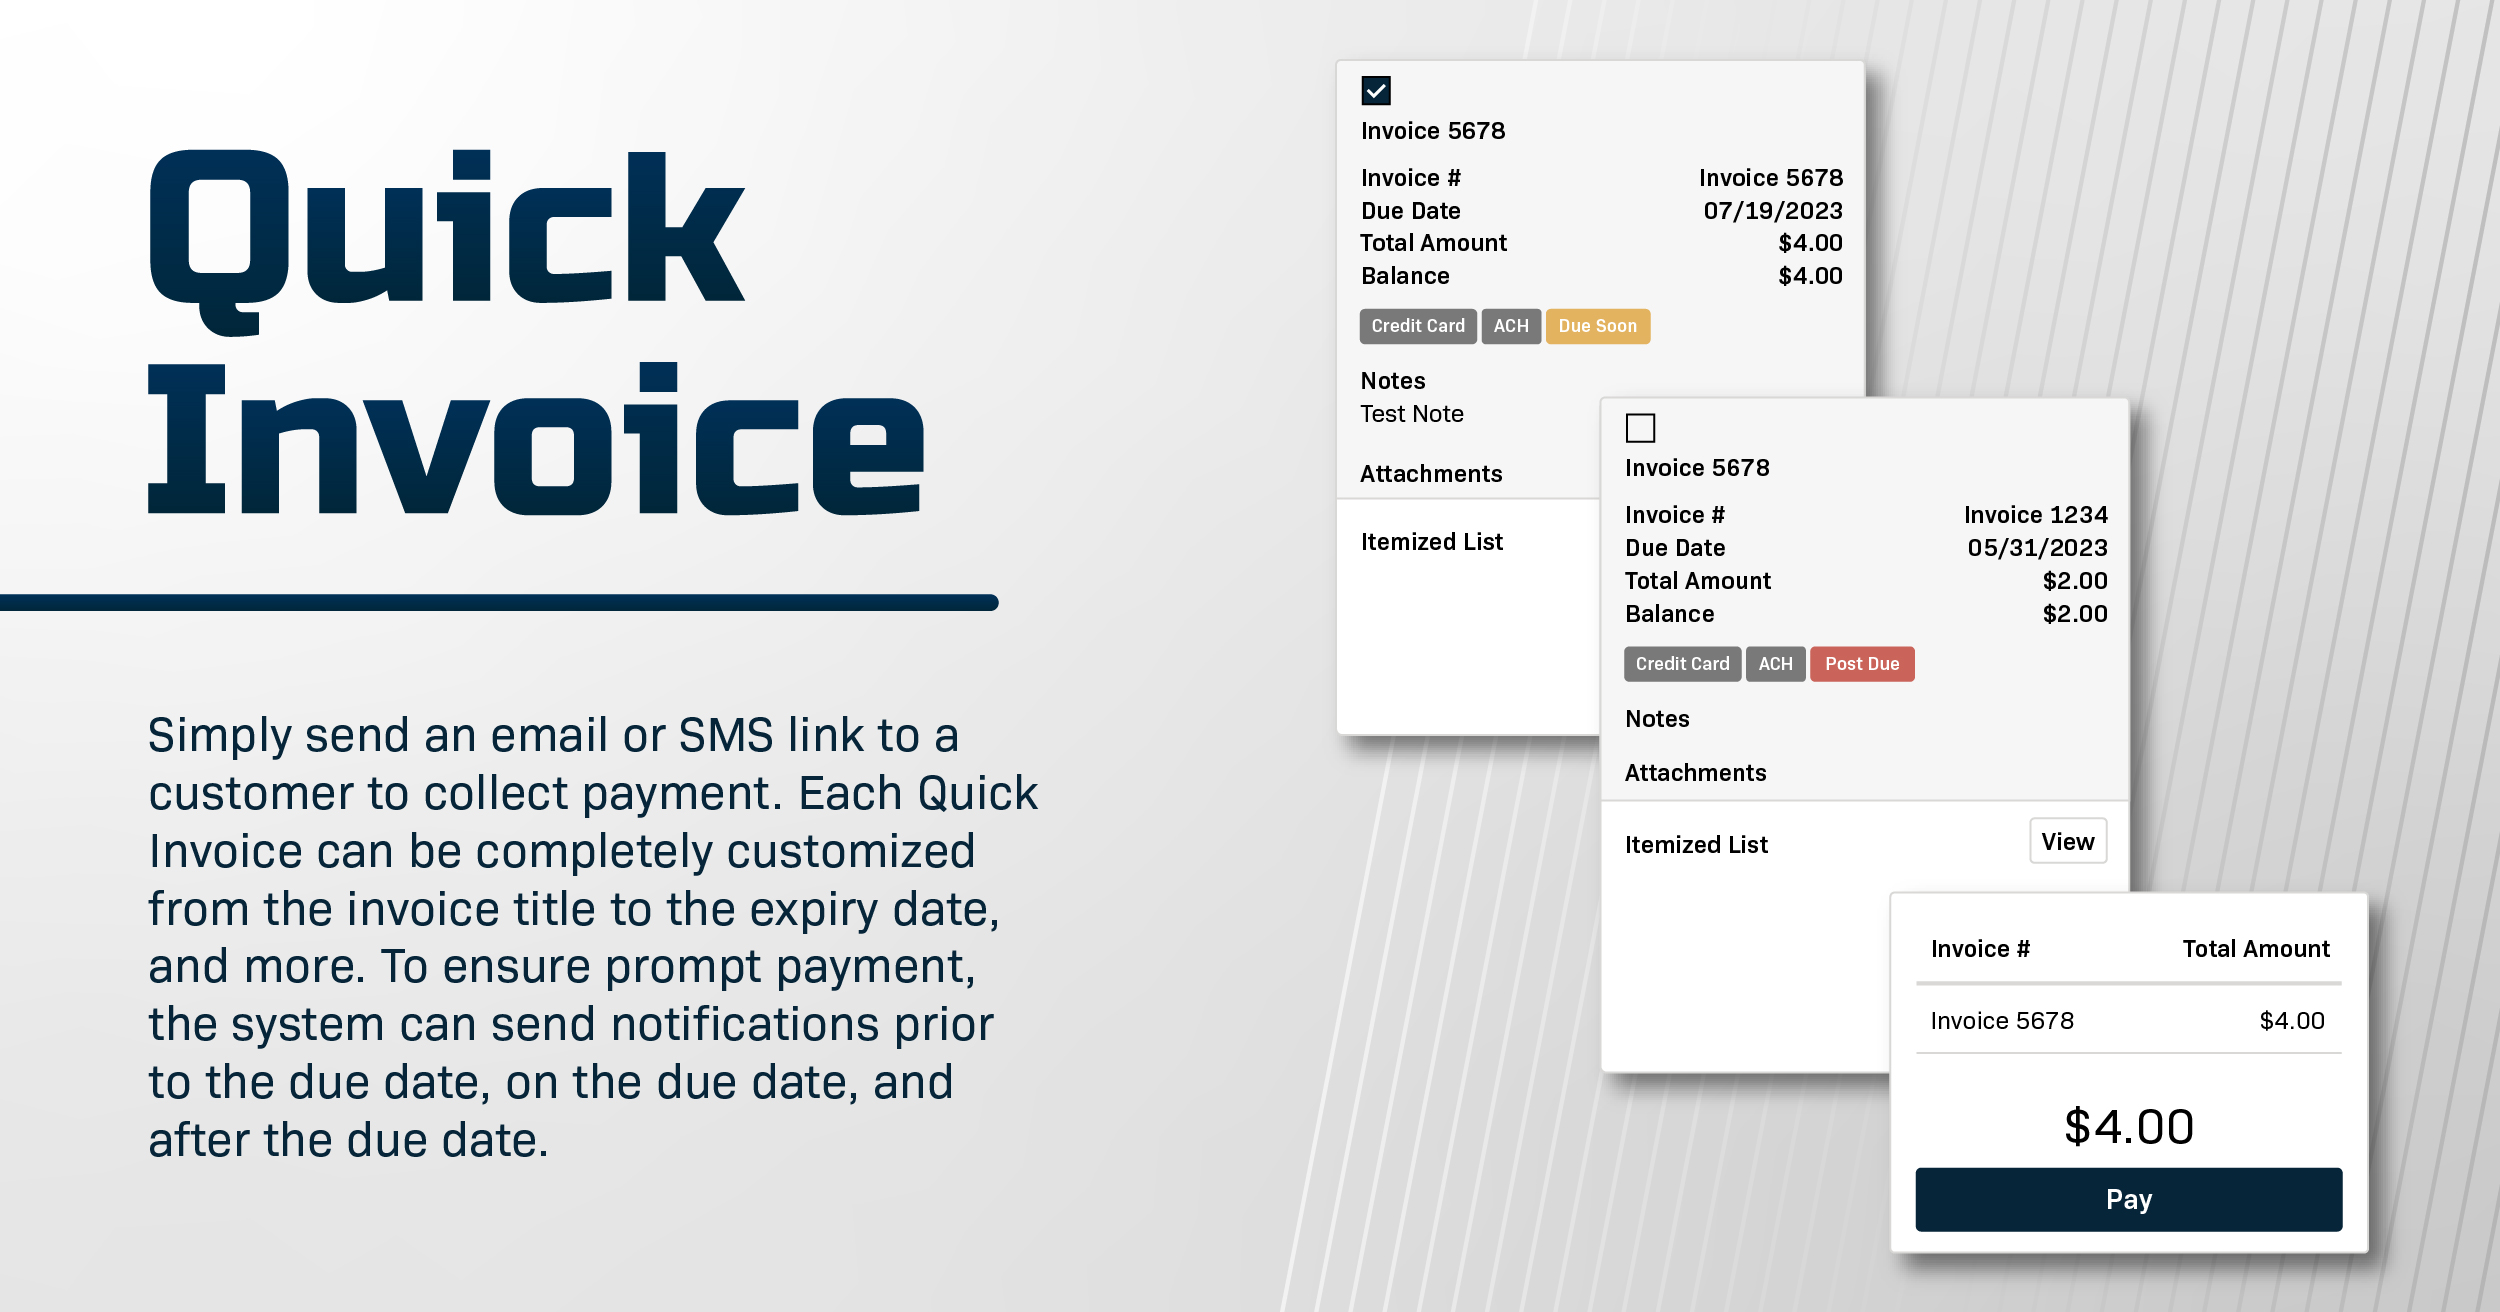 Quick Invoice: Get Paid Faster with an Optimized Workflow - Featured Image